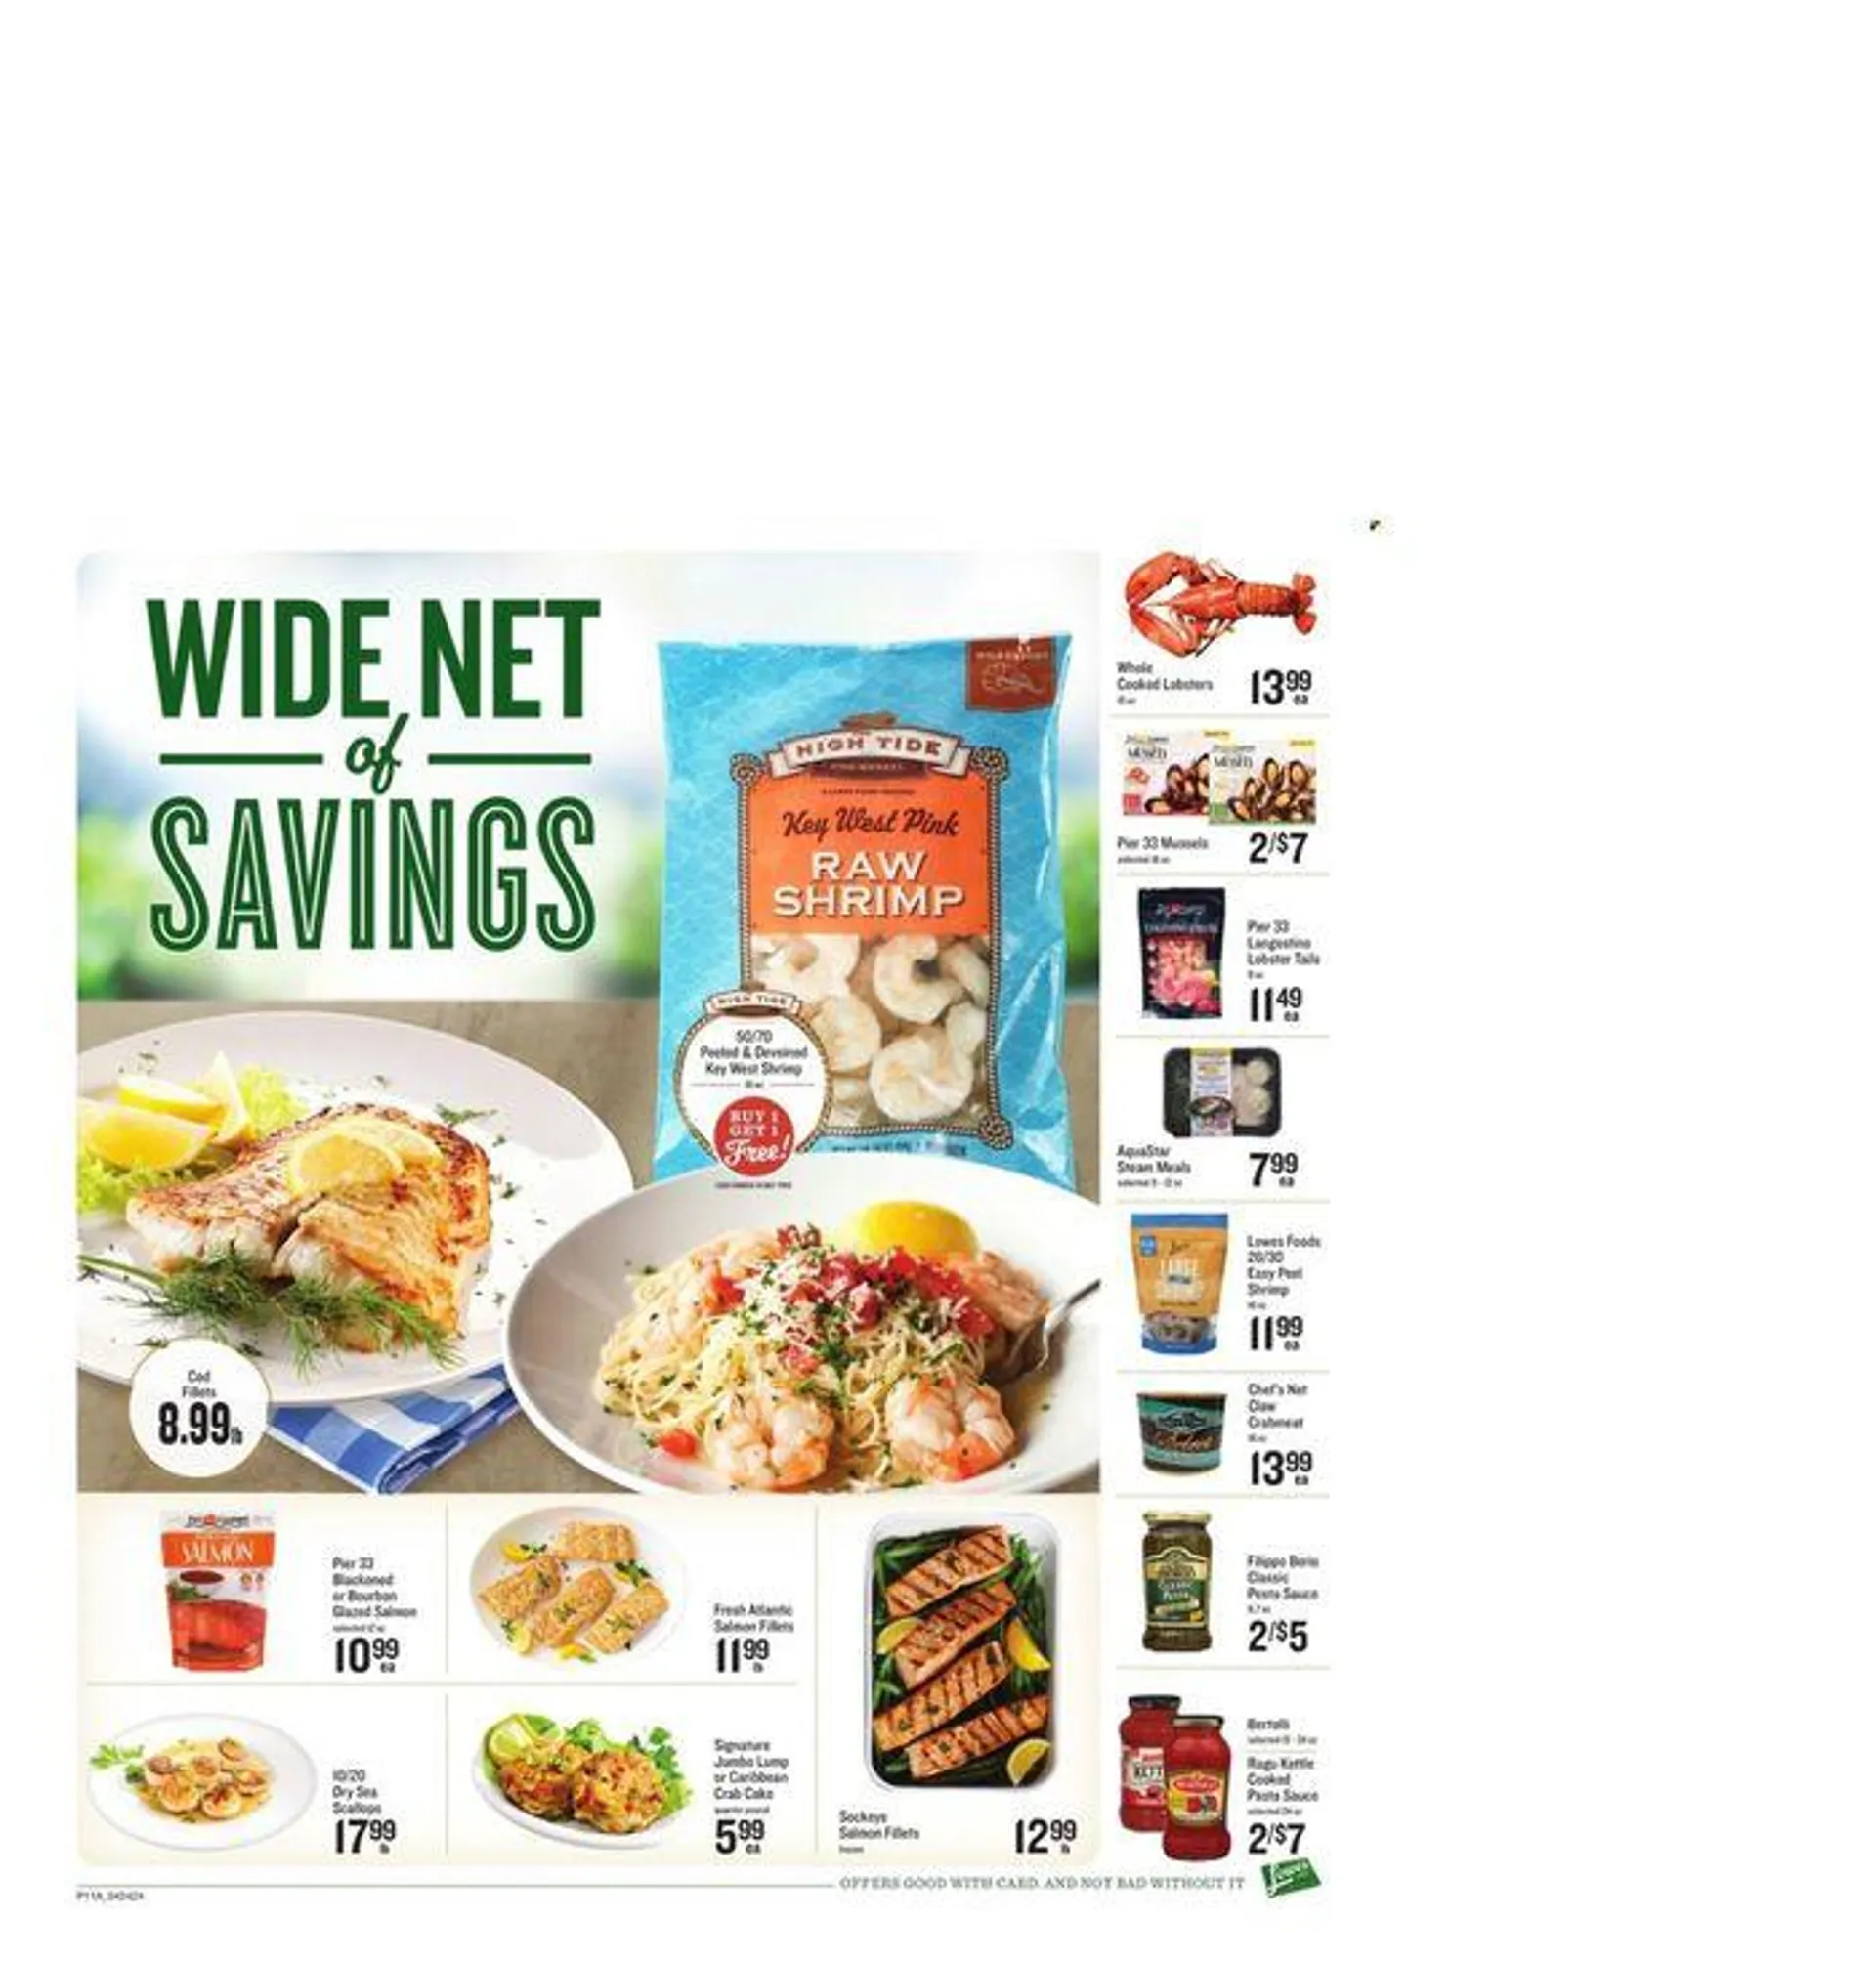 Lowes Foods Weekly ad - 2